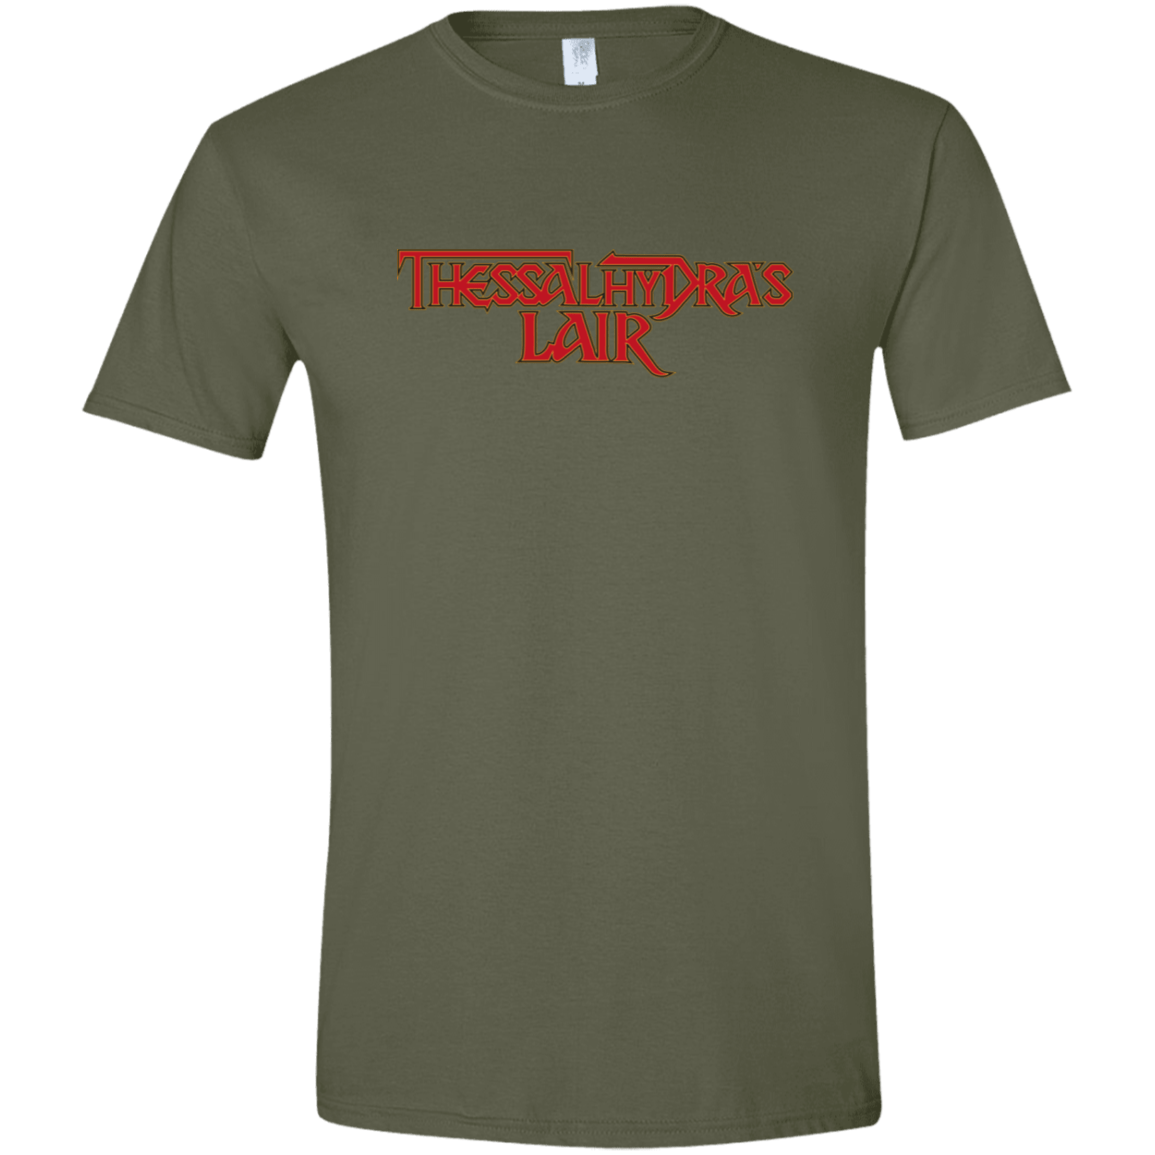 T-Shirts Military Green / S Thessalhydras Lair Men's Semi-Fitted Softstyle